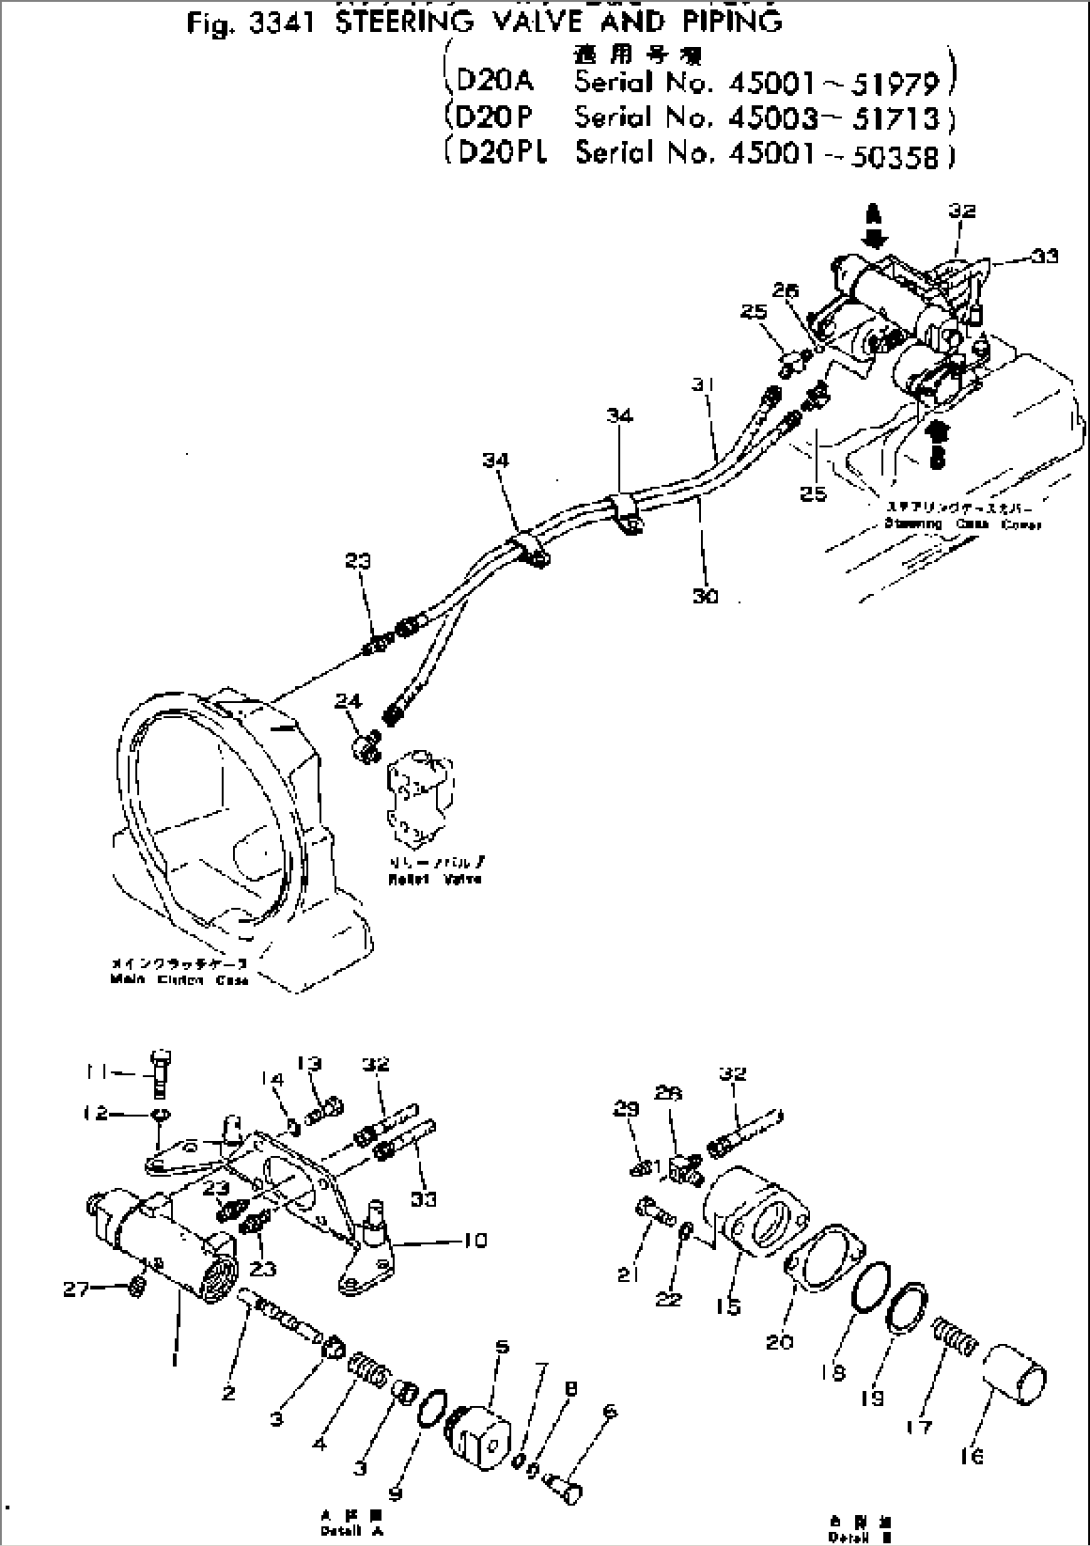 STEERING VALVE AND PIPING(#45001-51979)